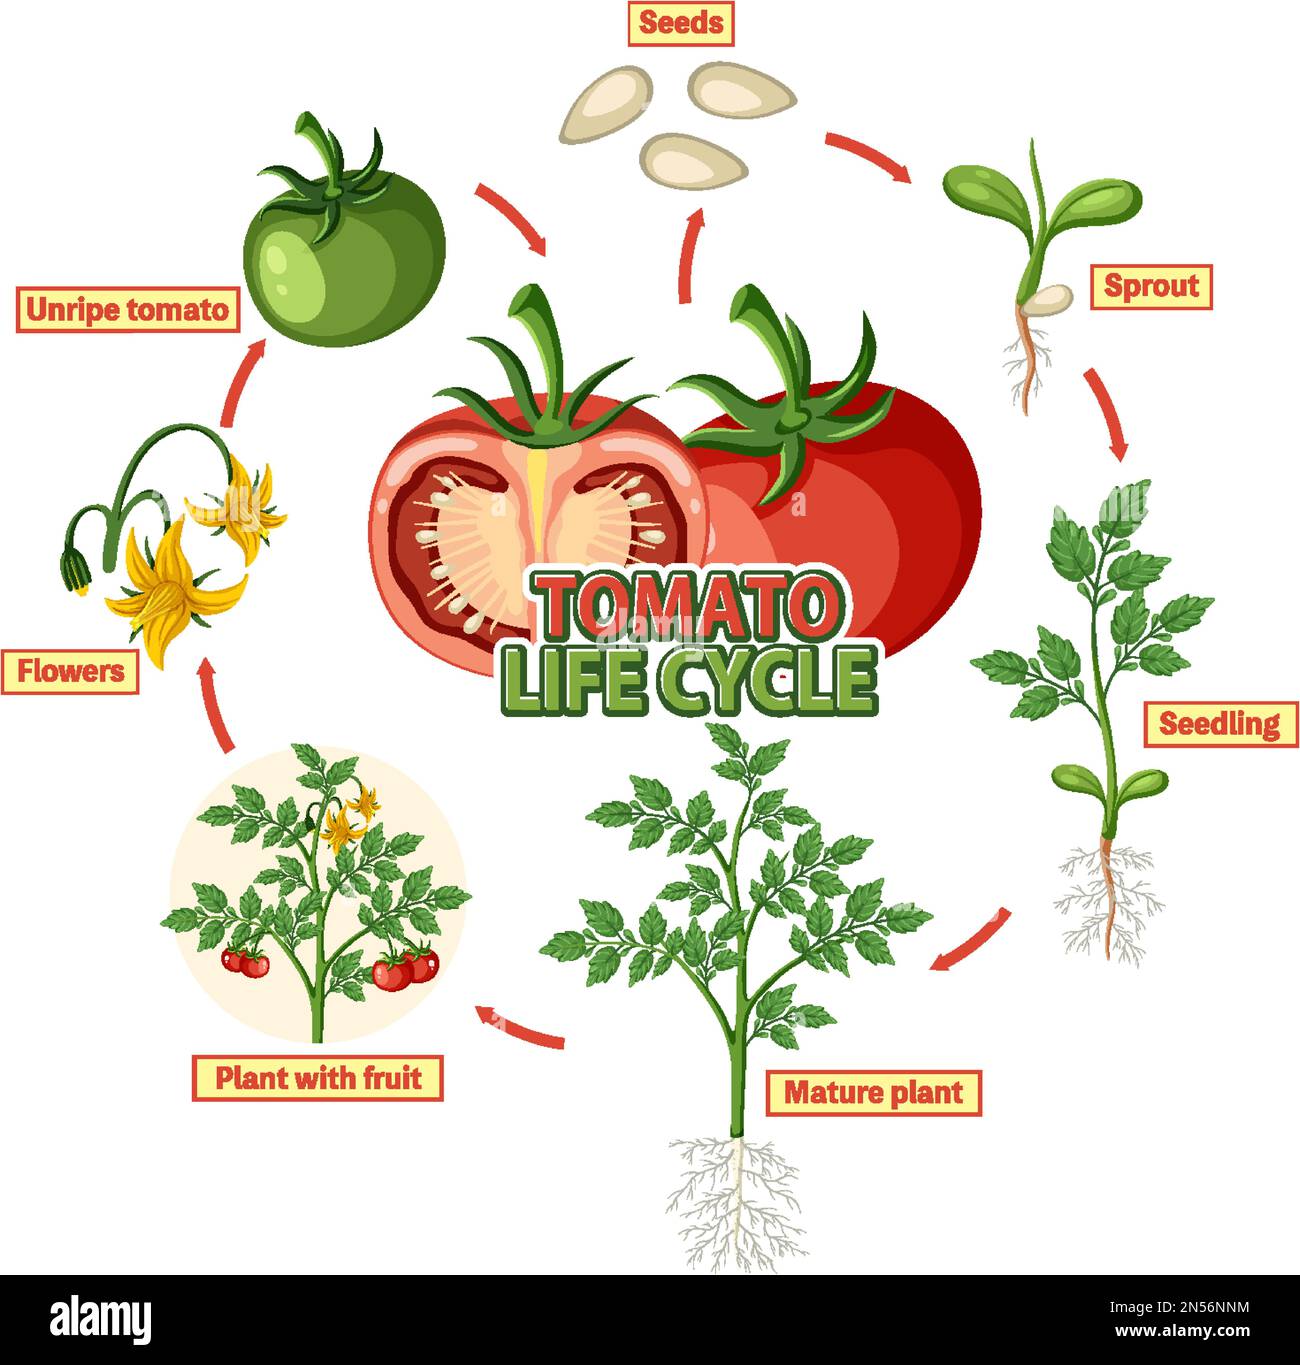 Life Cycle Of A Tomato Plant Diagram Illustration Stock Vector Image